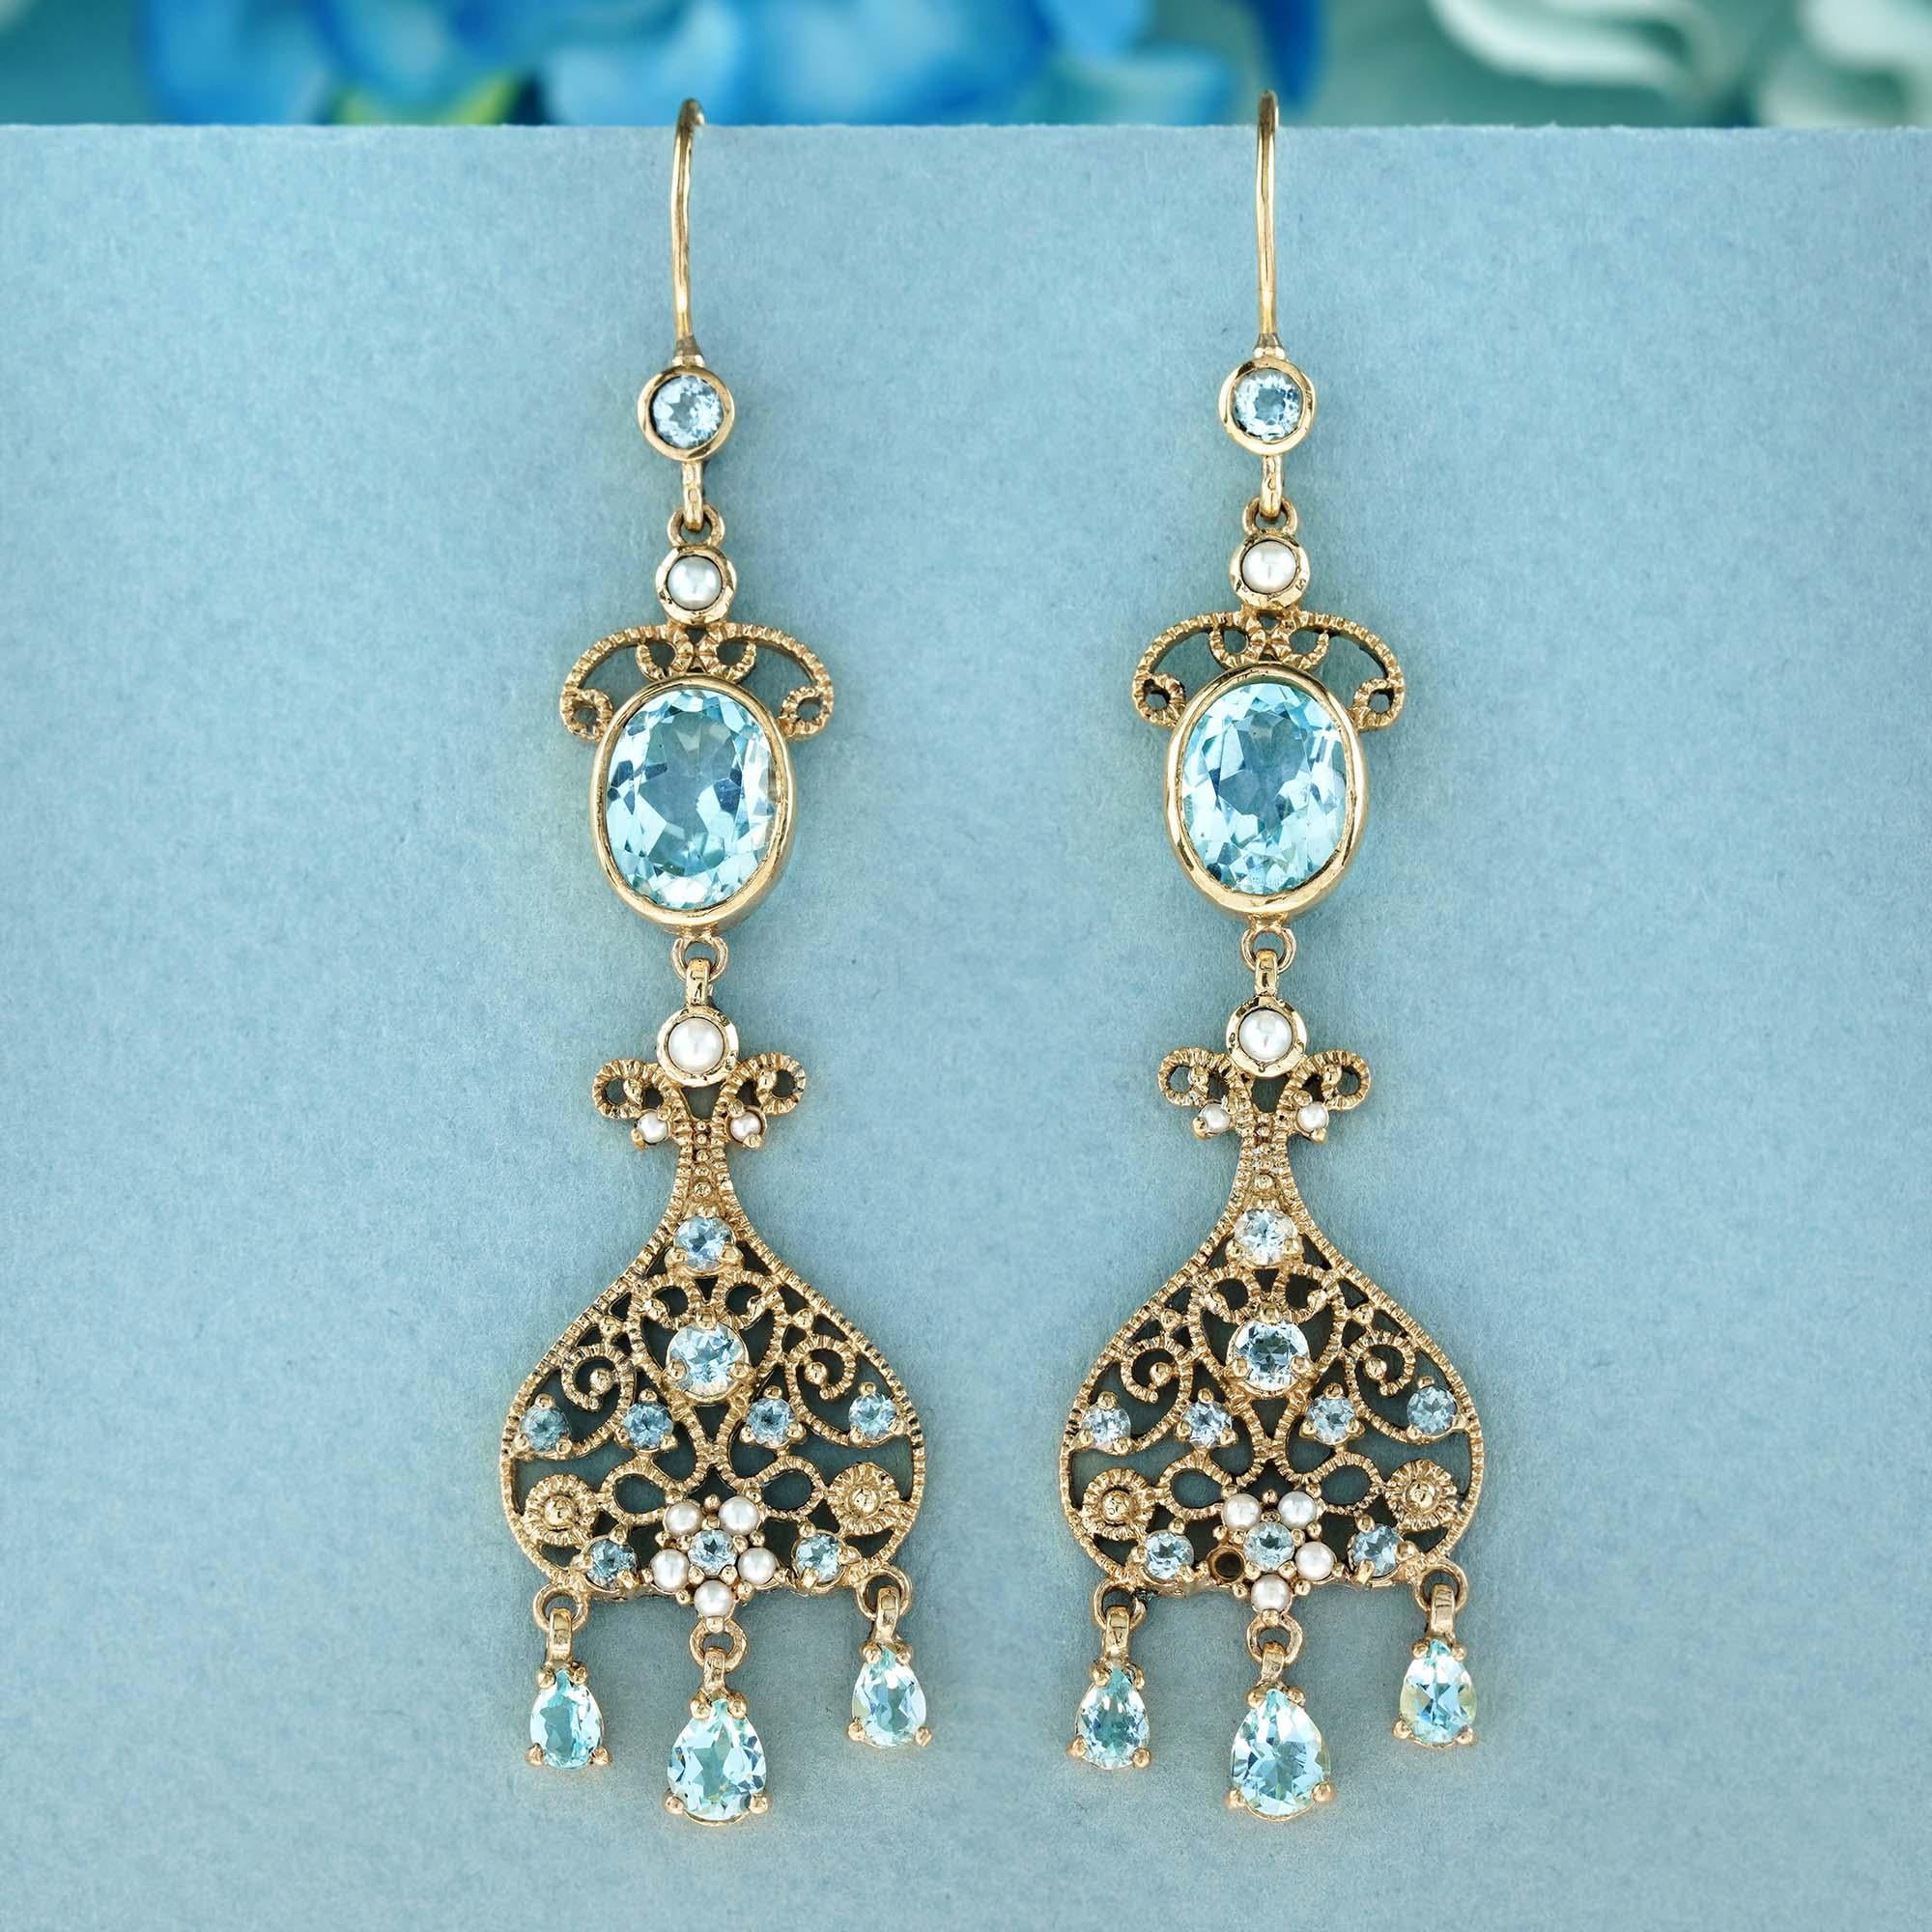 These exquisite vintage-inspired dangle earrings showcase oval-shaped blue topaz gemstones and lustrous pearls, all elegantly set in delicate milgrain yellow gold. The oval-shaped topaz stones exhibit a stunningly clear sky blue hue reminiscent of a